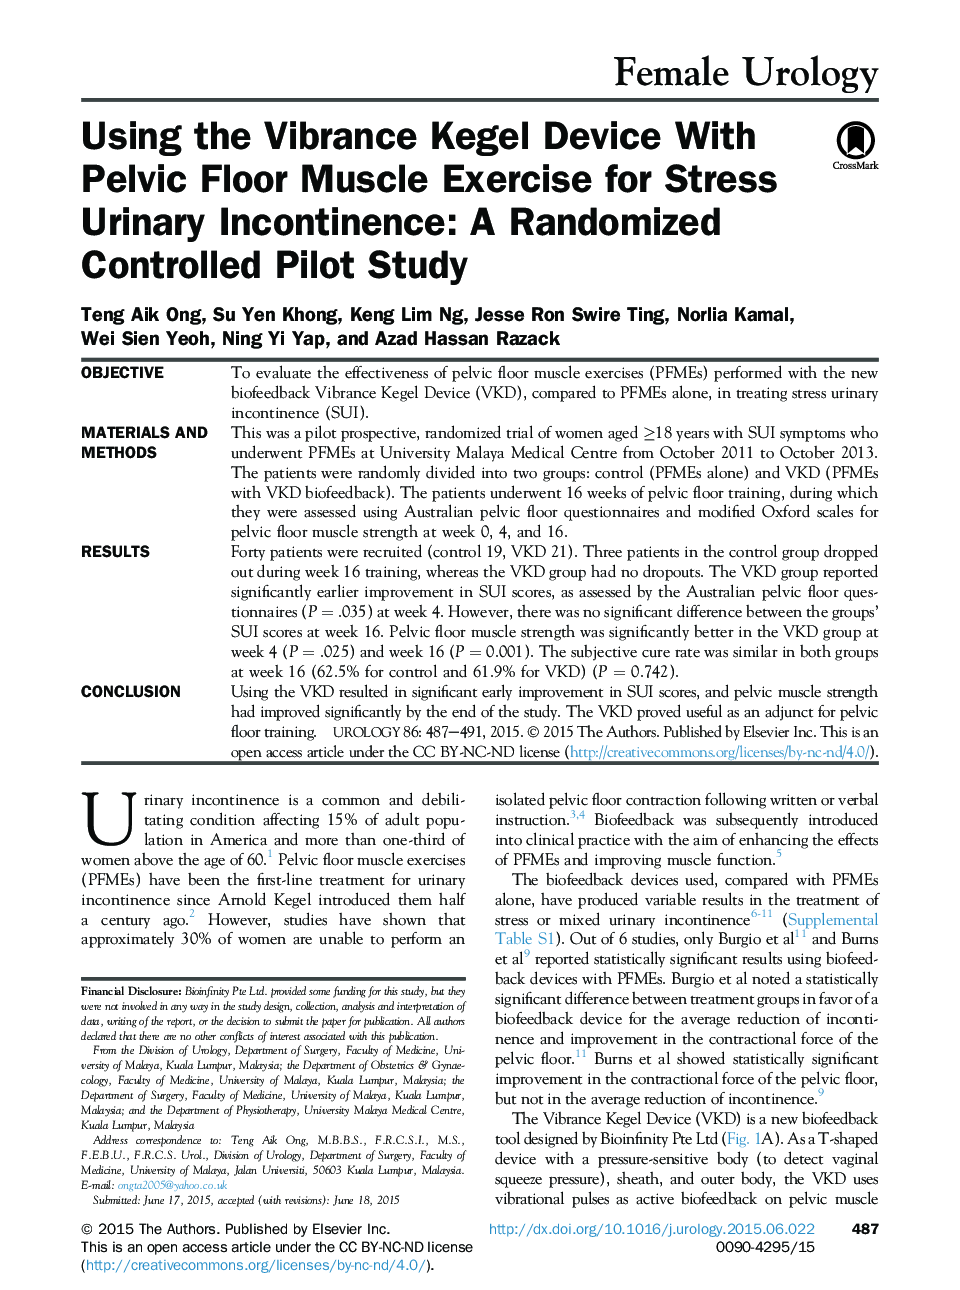 Using the Vibrance Kegel Device With Pelvic Floor Muscle Exercise for Stress Urinary Incontinence: A Randomized Controlled Pilot Study